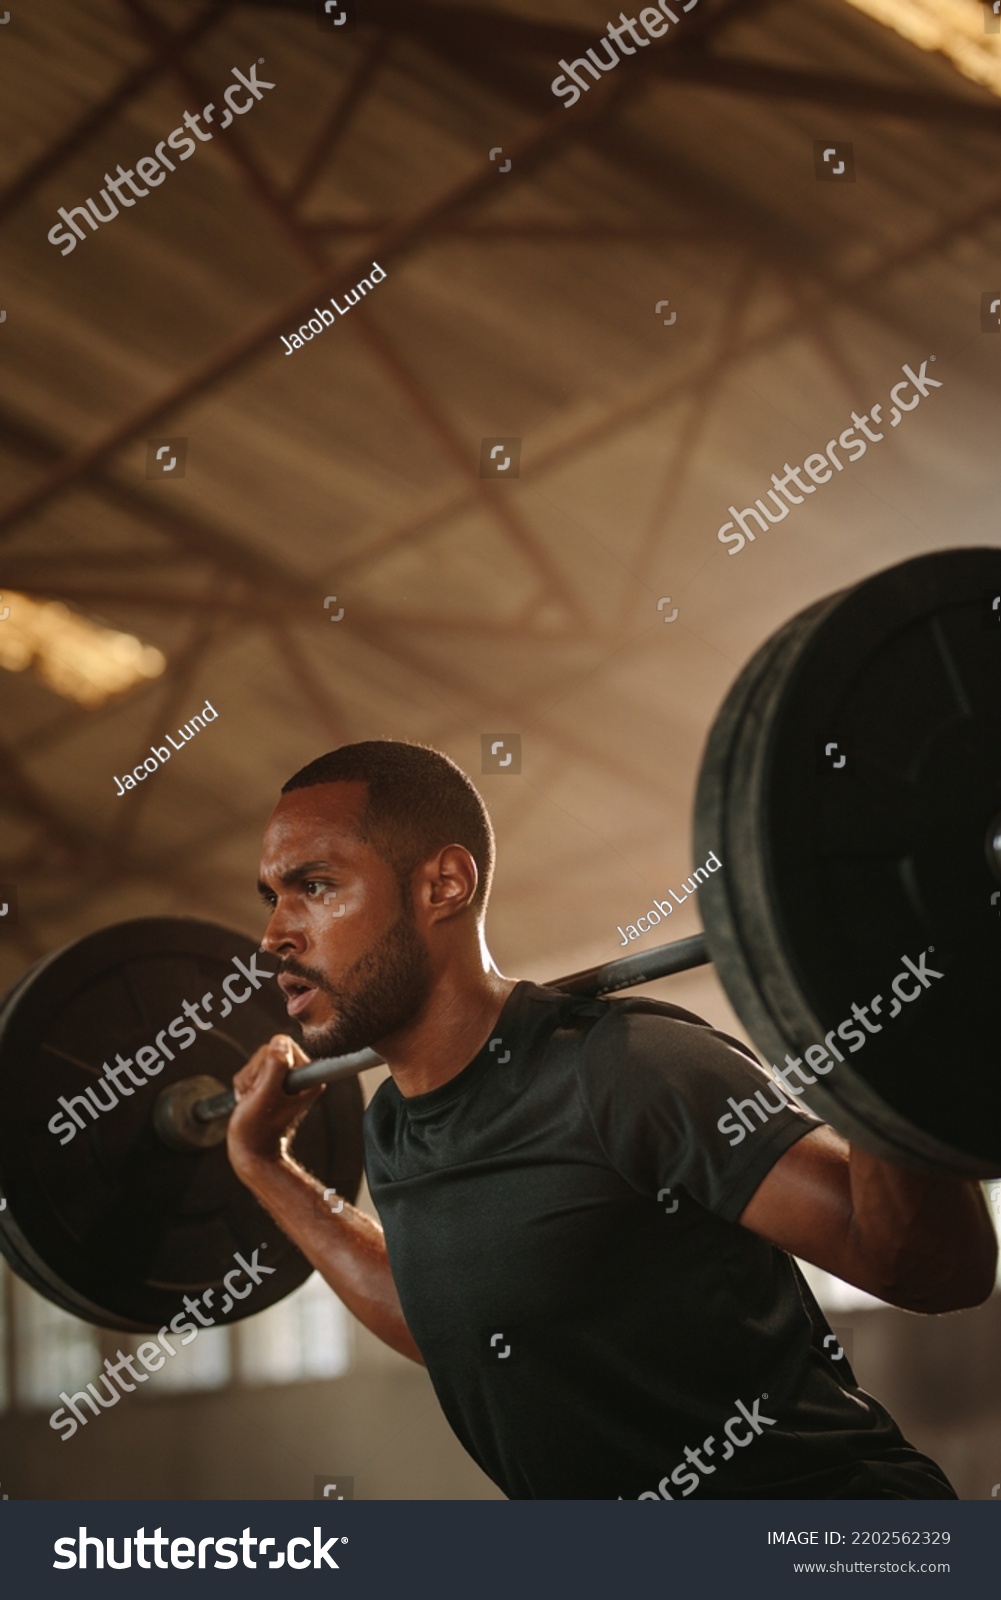 Fitness man doing back squats workout with heavy weight barbell. Sportsman doing exercise with heavy weights at old warehouse. #2202562329